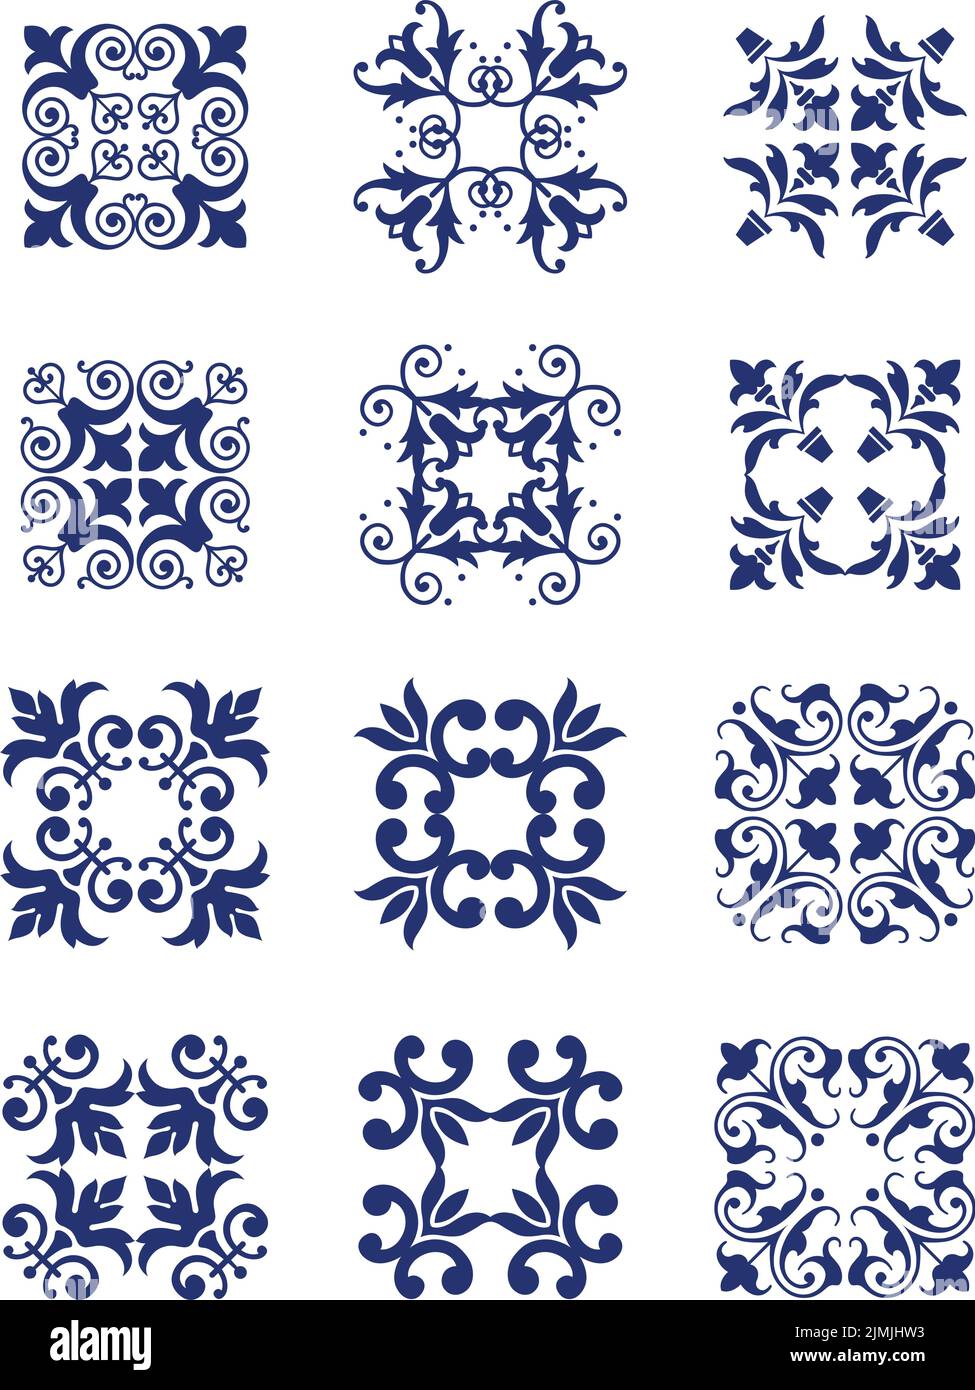 A set of vintage floral vector design icons and decorations Stock Vector